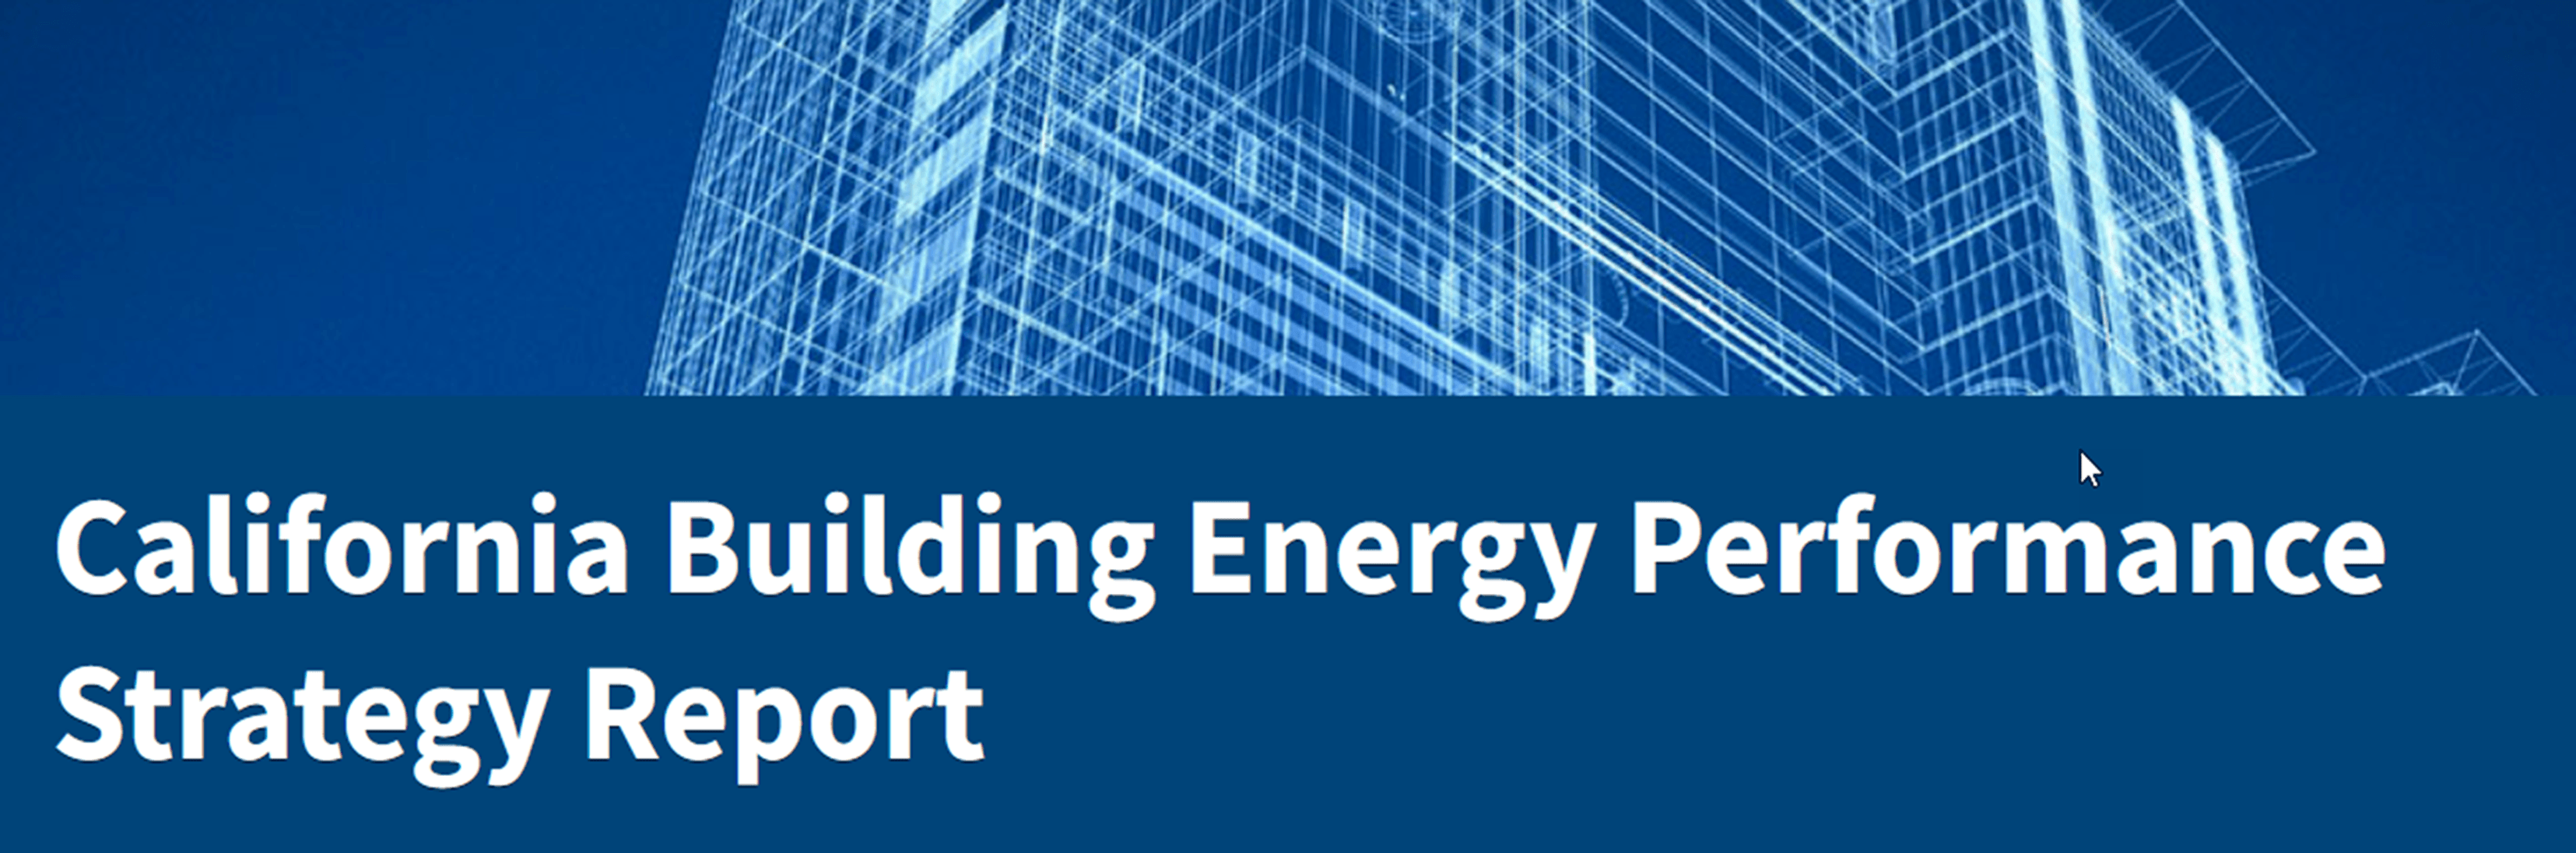 California Building Energy Performance Strategy Report